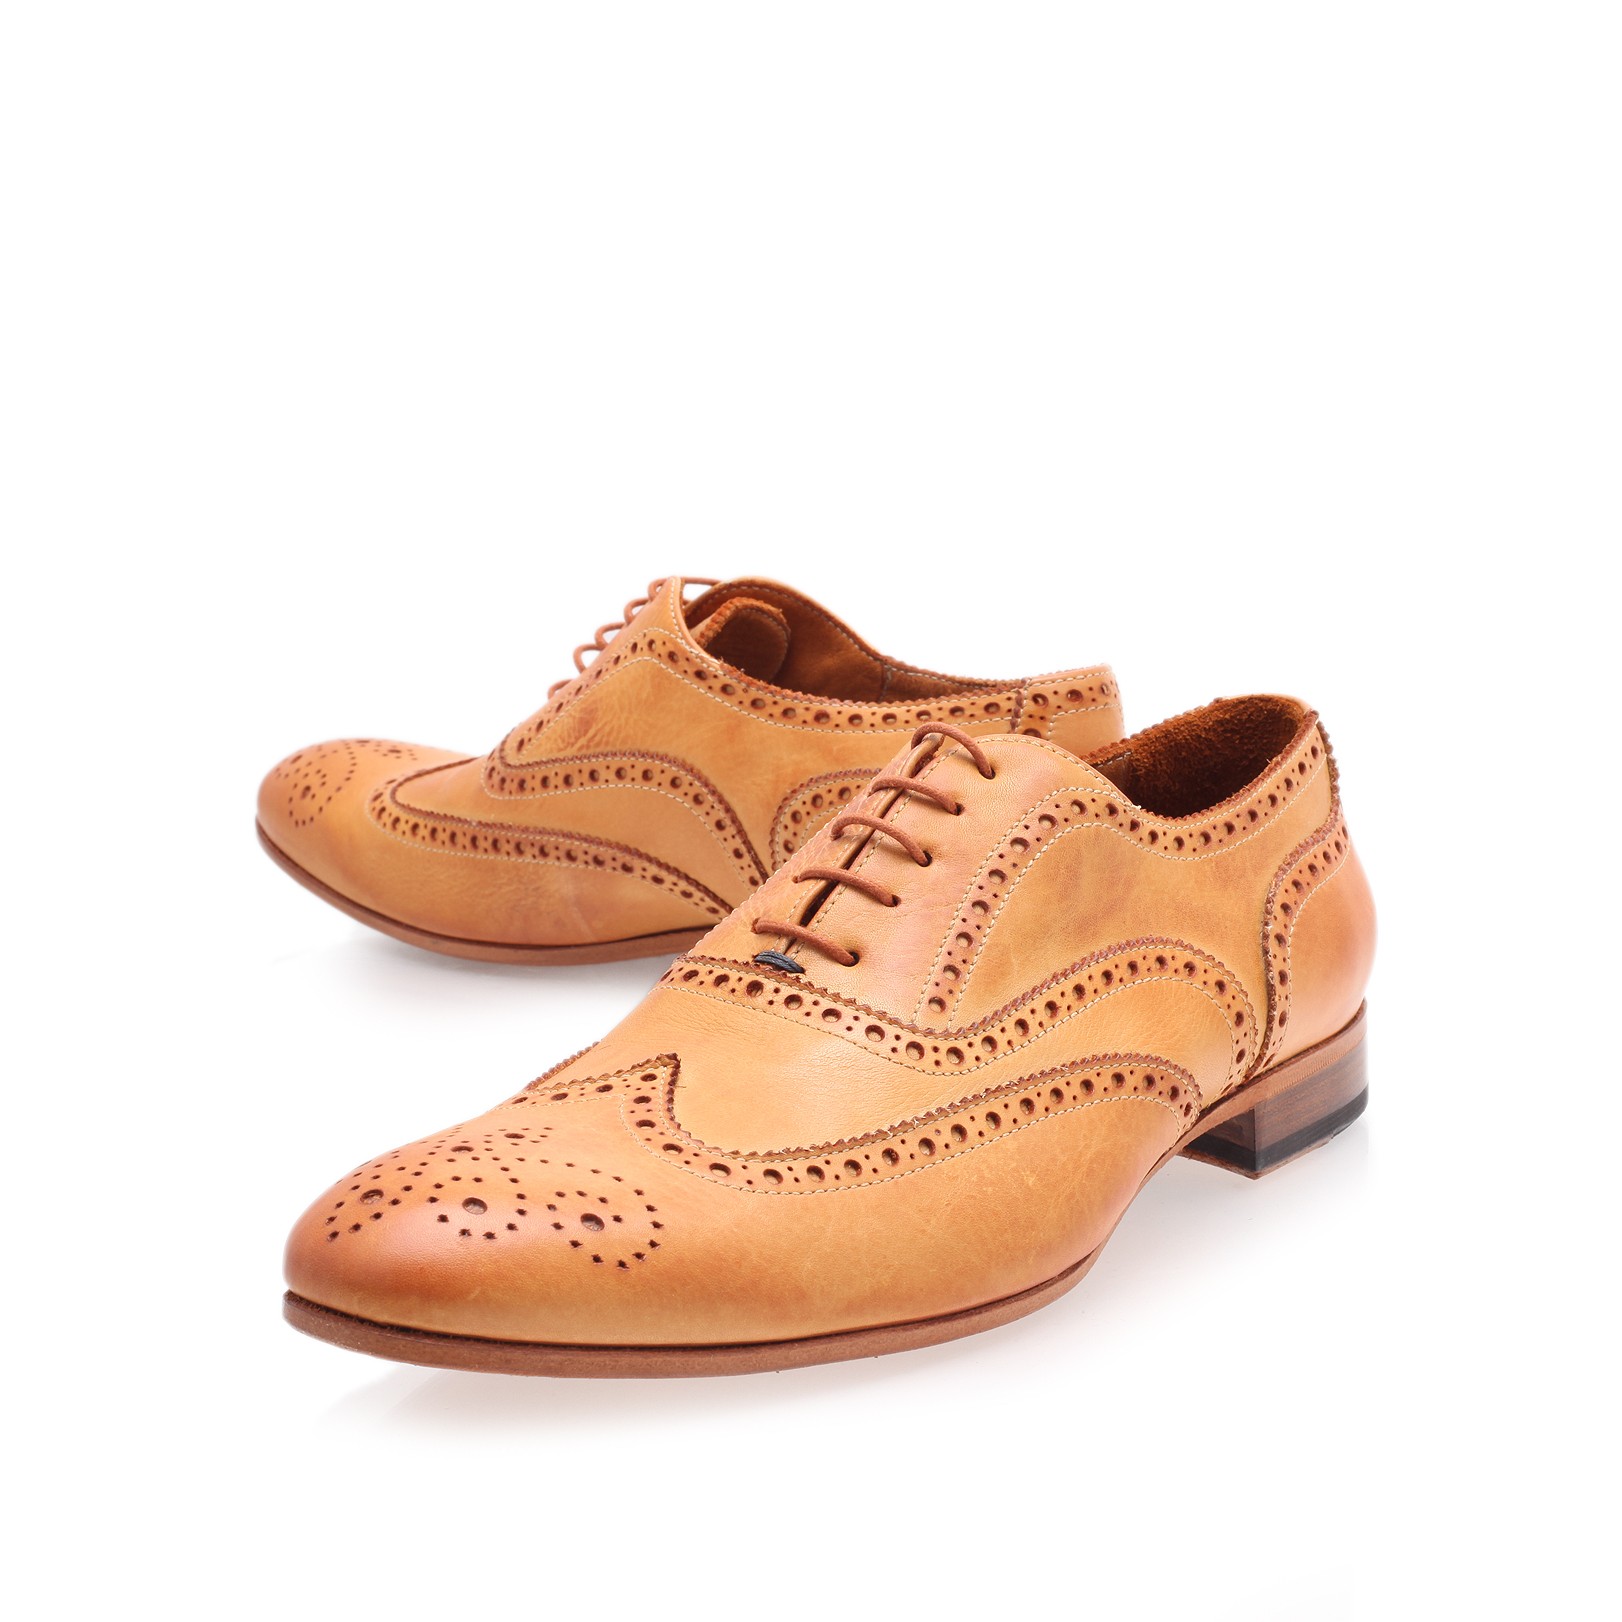 Paul Smith Leather Miller Brogue in Tan (Brown) for Men - Lyst